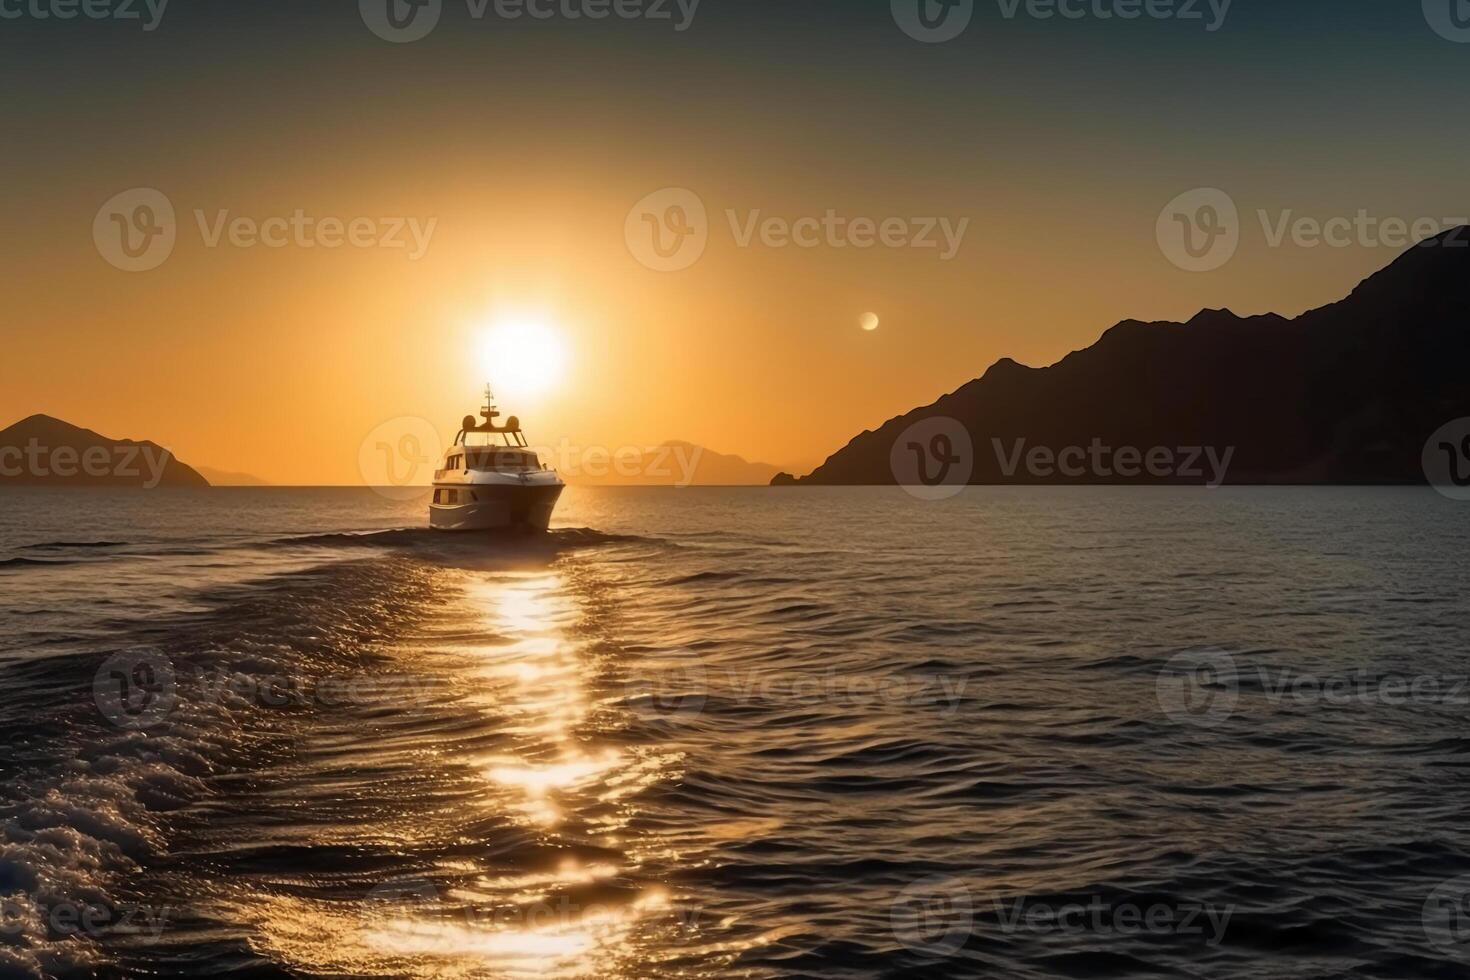 Luxury yacht sailing in the middle of the sea beside an island and mountains in the horizon at sunset as wide banner. photo